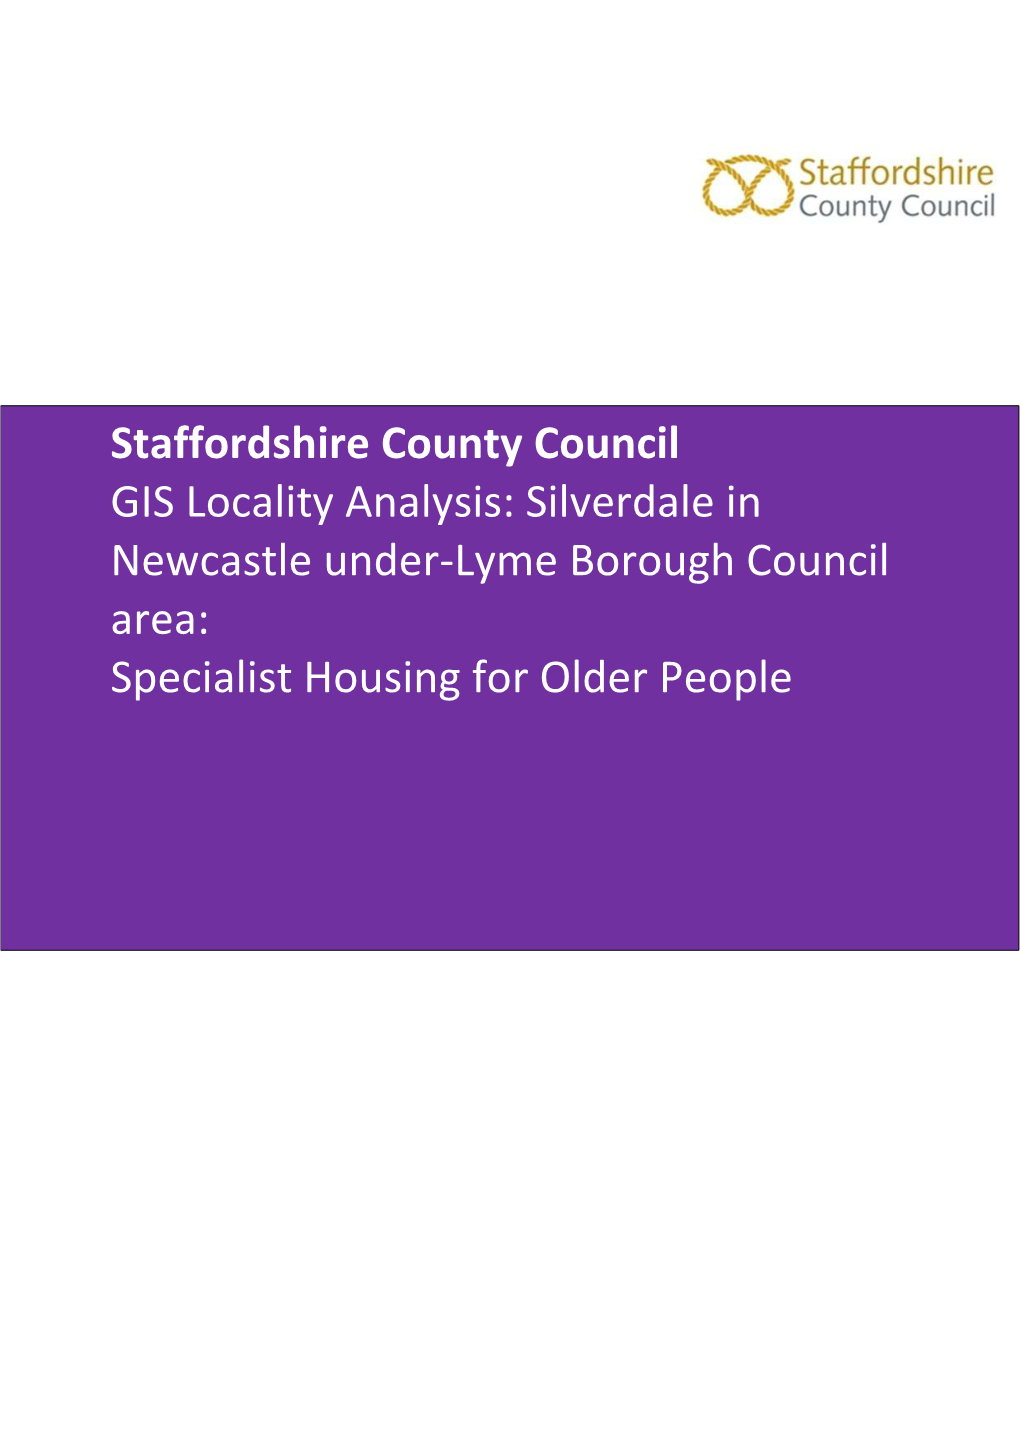 Silverdale in Newcastle Under-Lyme Borough Council Area